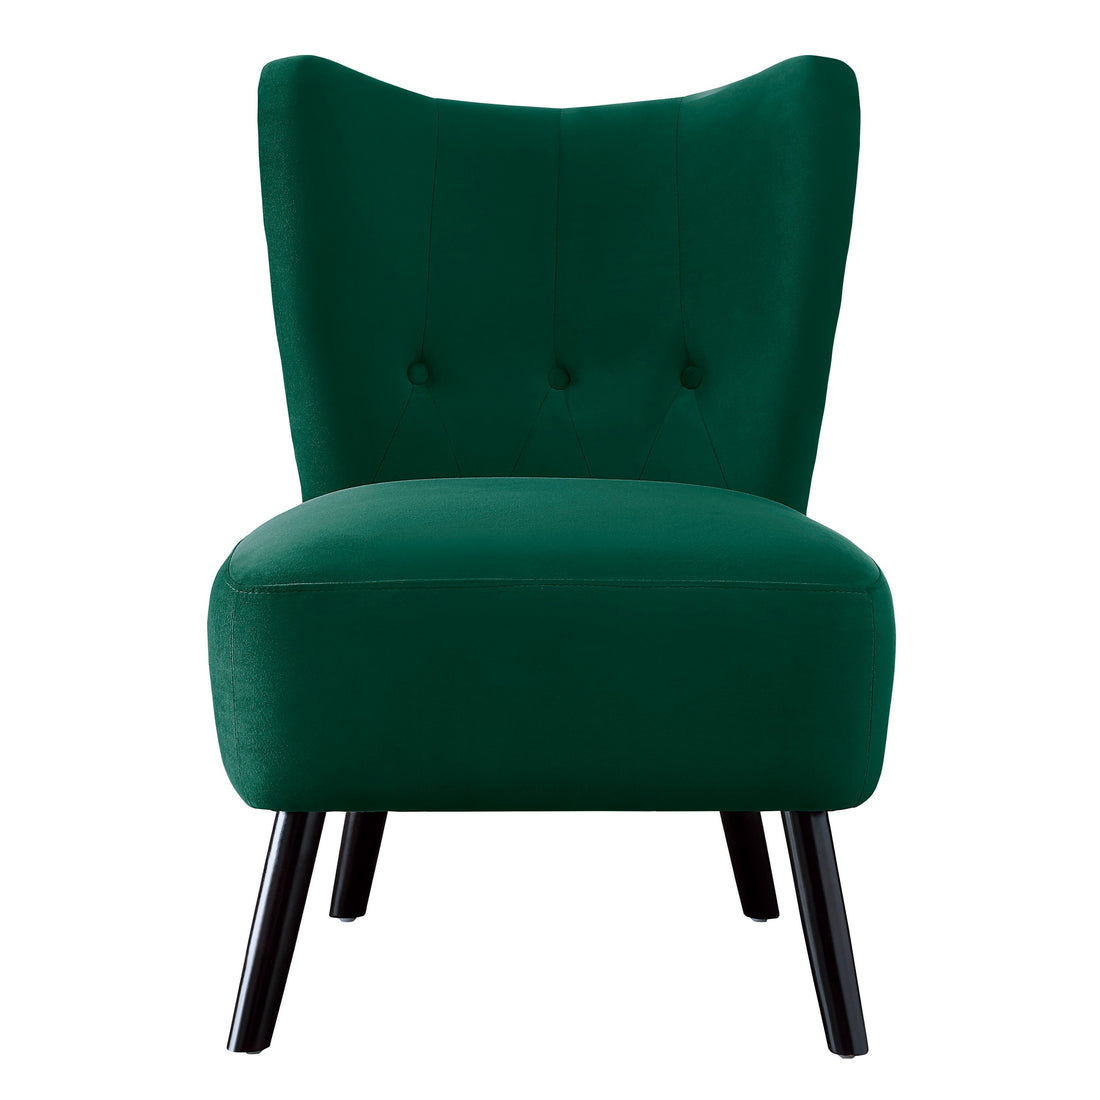 Unique Style Green Velvet Covering Accent Chair Button green-primary living space-modern-retro-solid